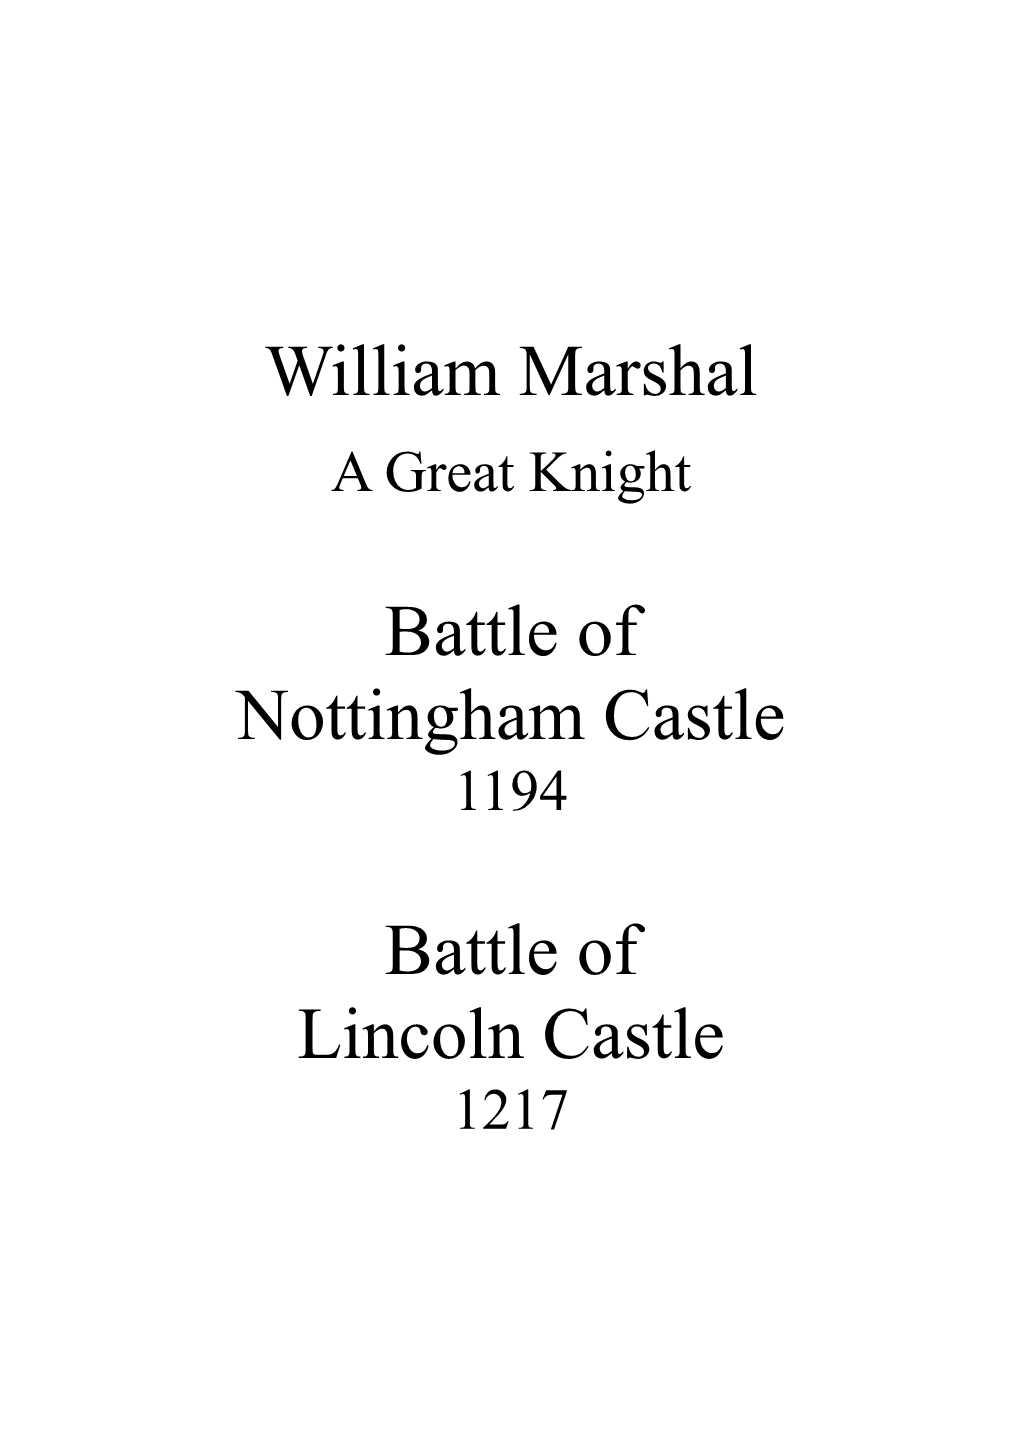 William Marshal a Great Knight